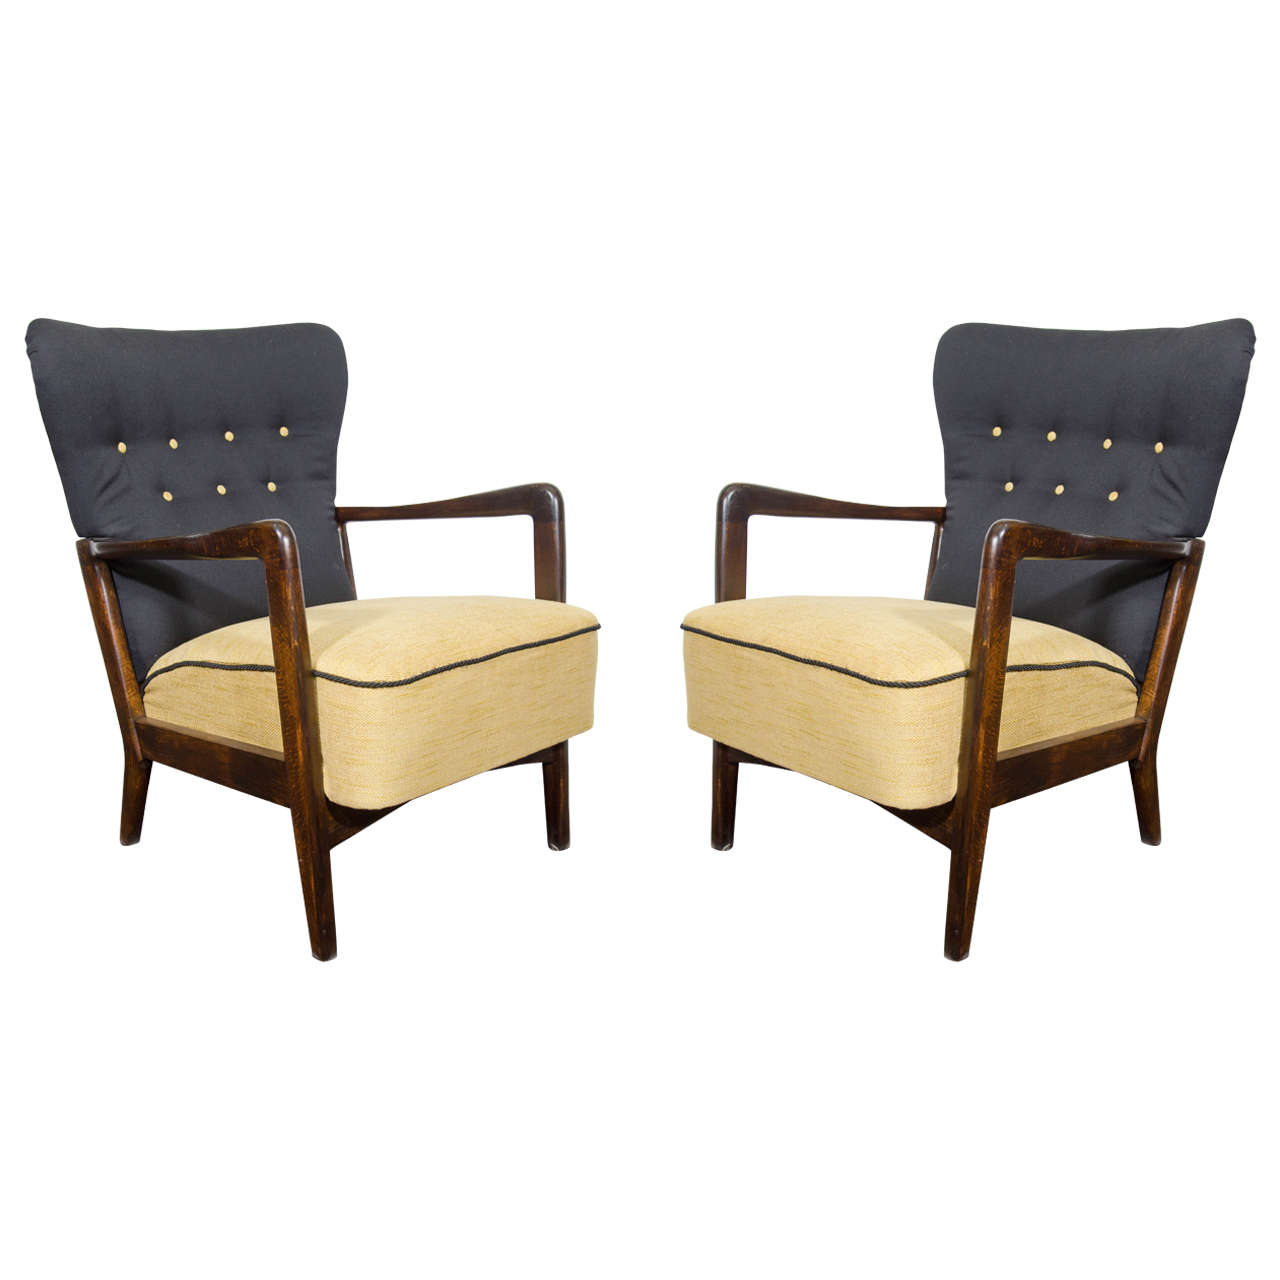 A Scandinavian Modern Pair of Fritz Hansen Two-Tone Black and Yellow Easy Chairs